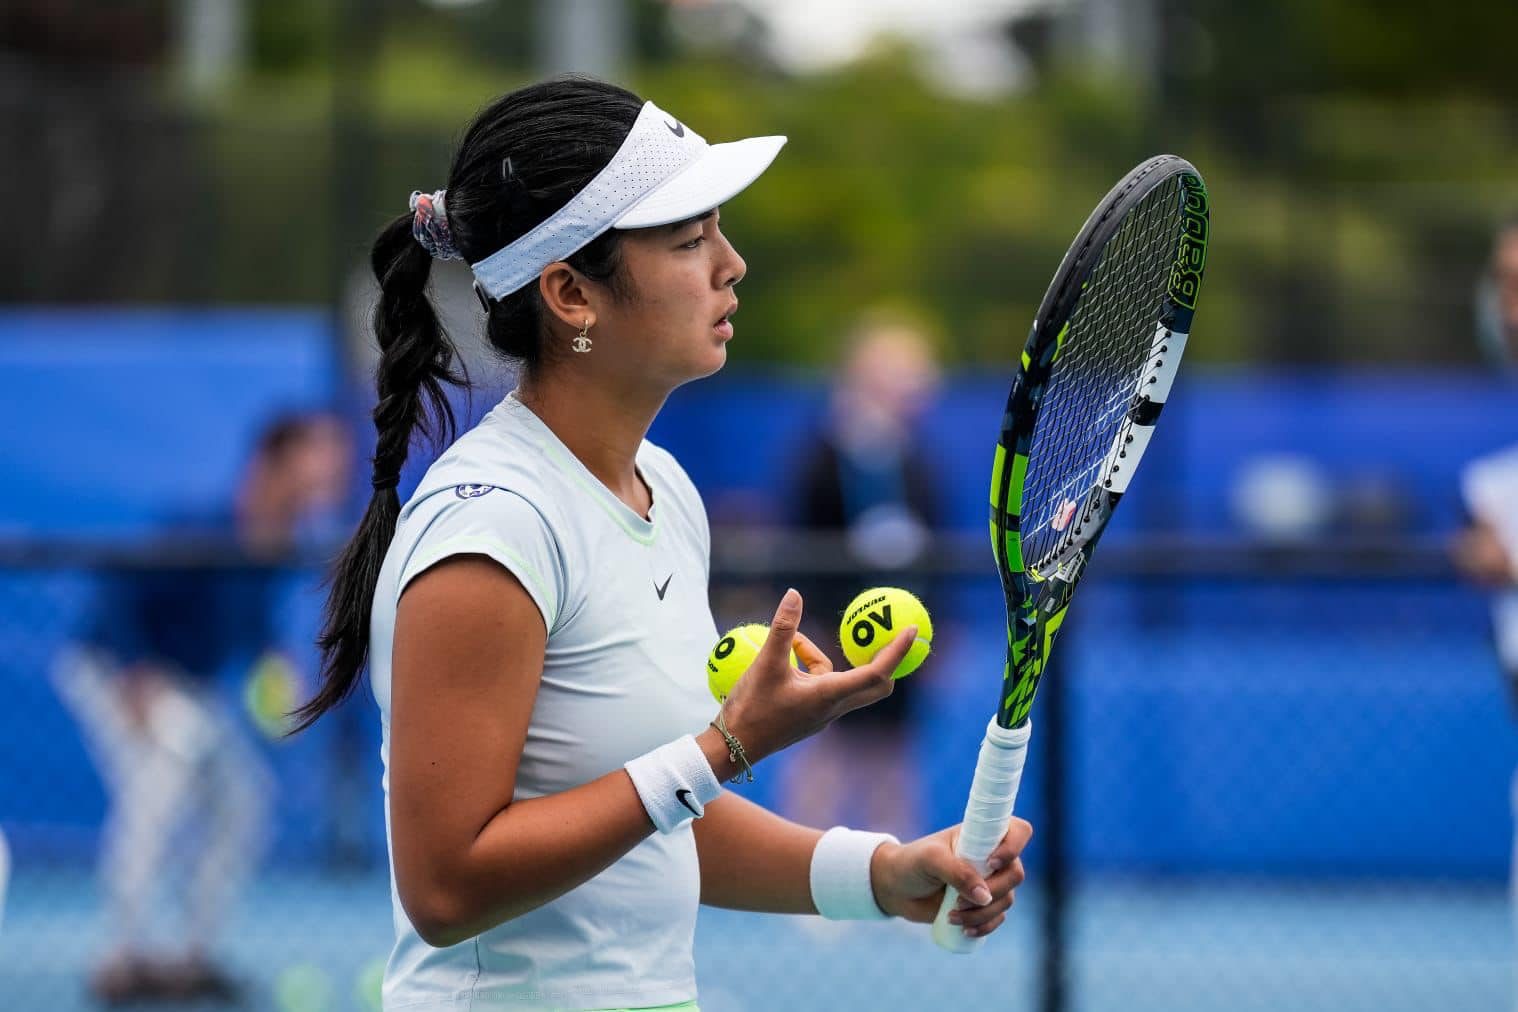 Alex Eala loses early lead, bows out of Miami Open